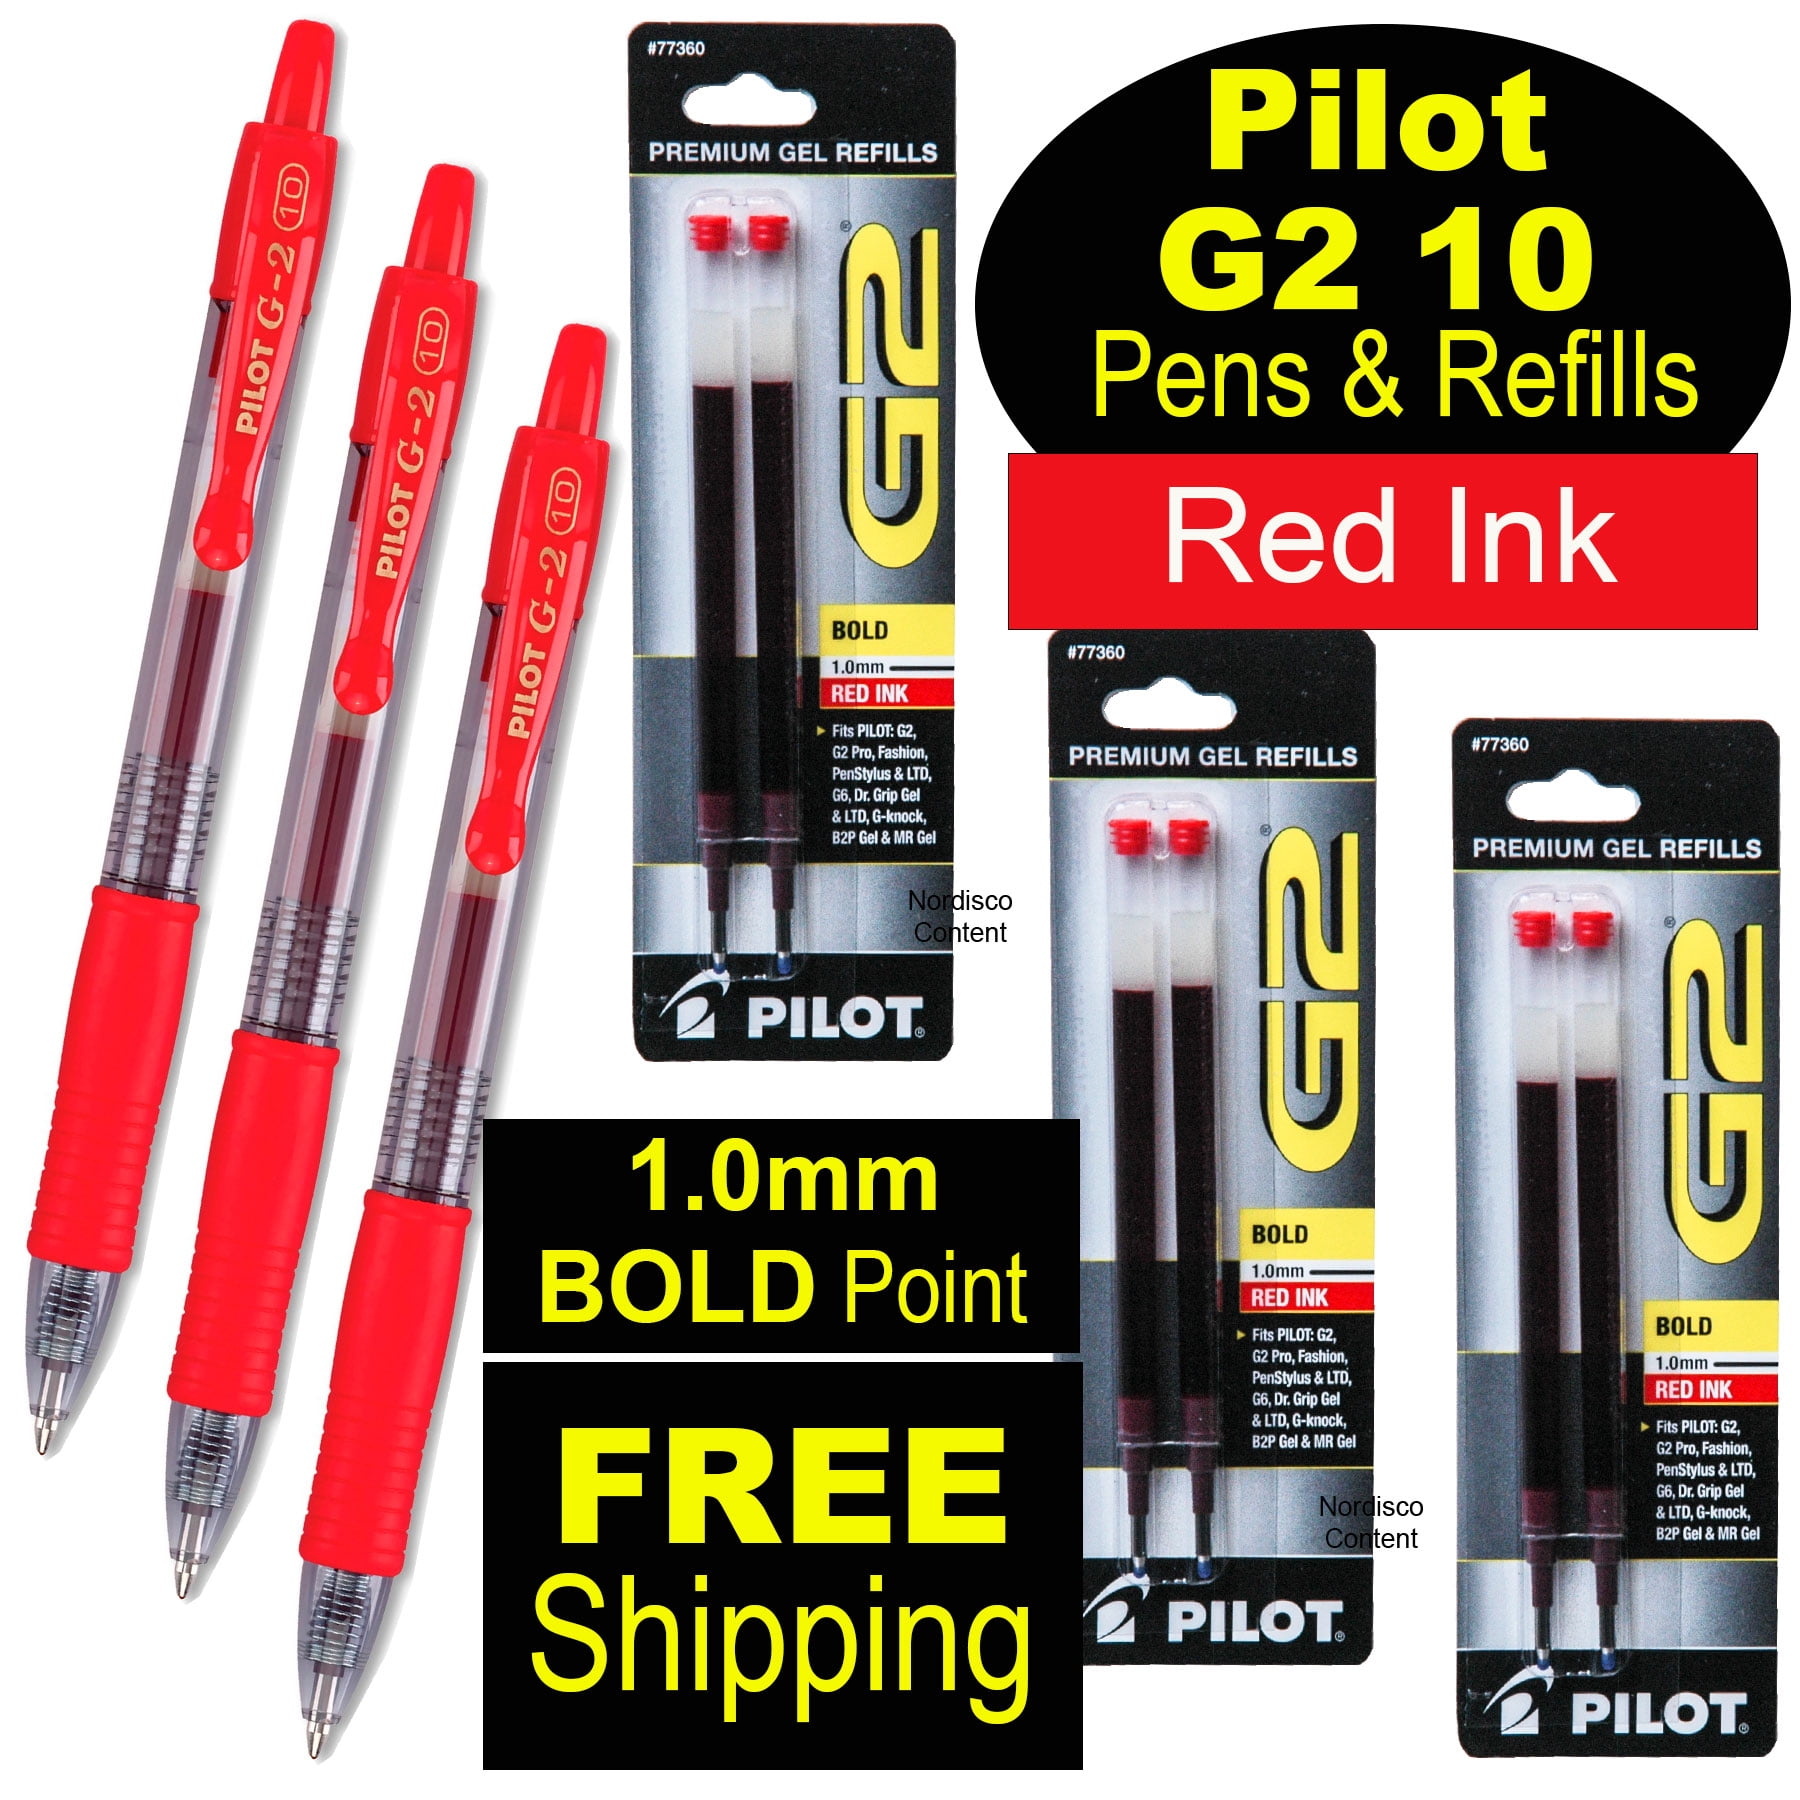 1 Of Each Colour - 4 Pens - Black Blue Red Green Pilot G2 Assorted Pack Retractable Rollerball Pen Pens Extra Fine Gel Ink Refillable 0.5mm Nib Tip 0.3mm Line G2-5